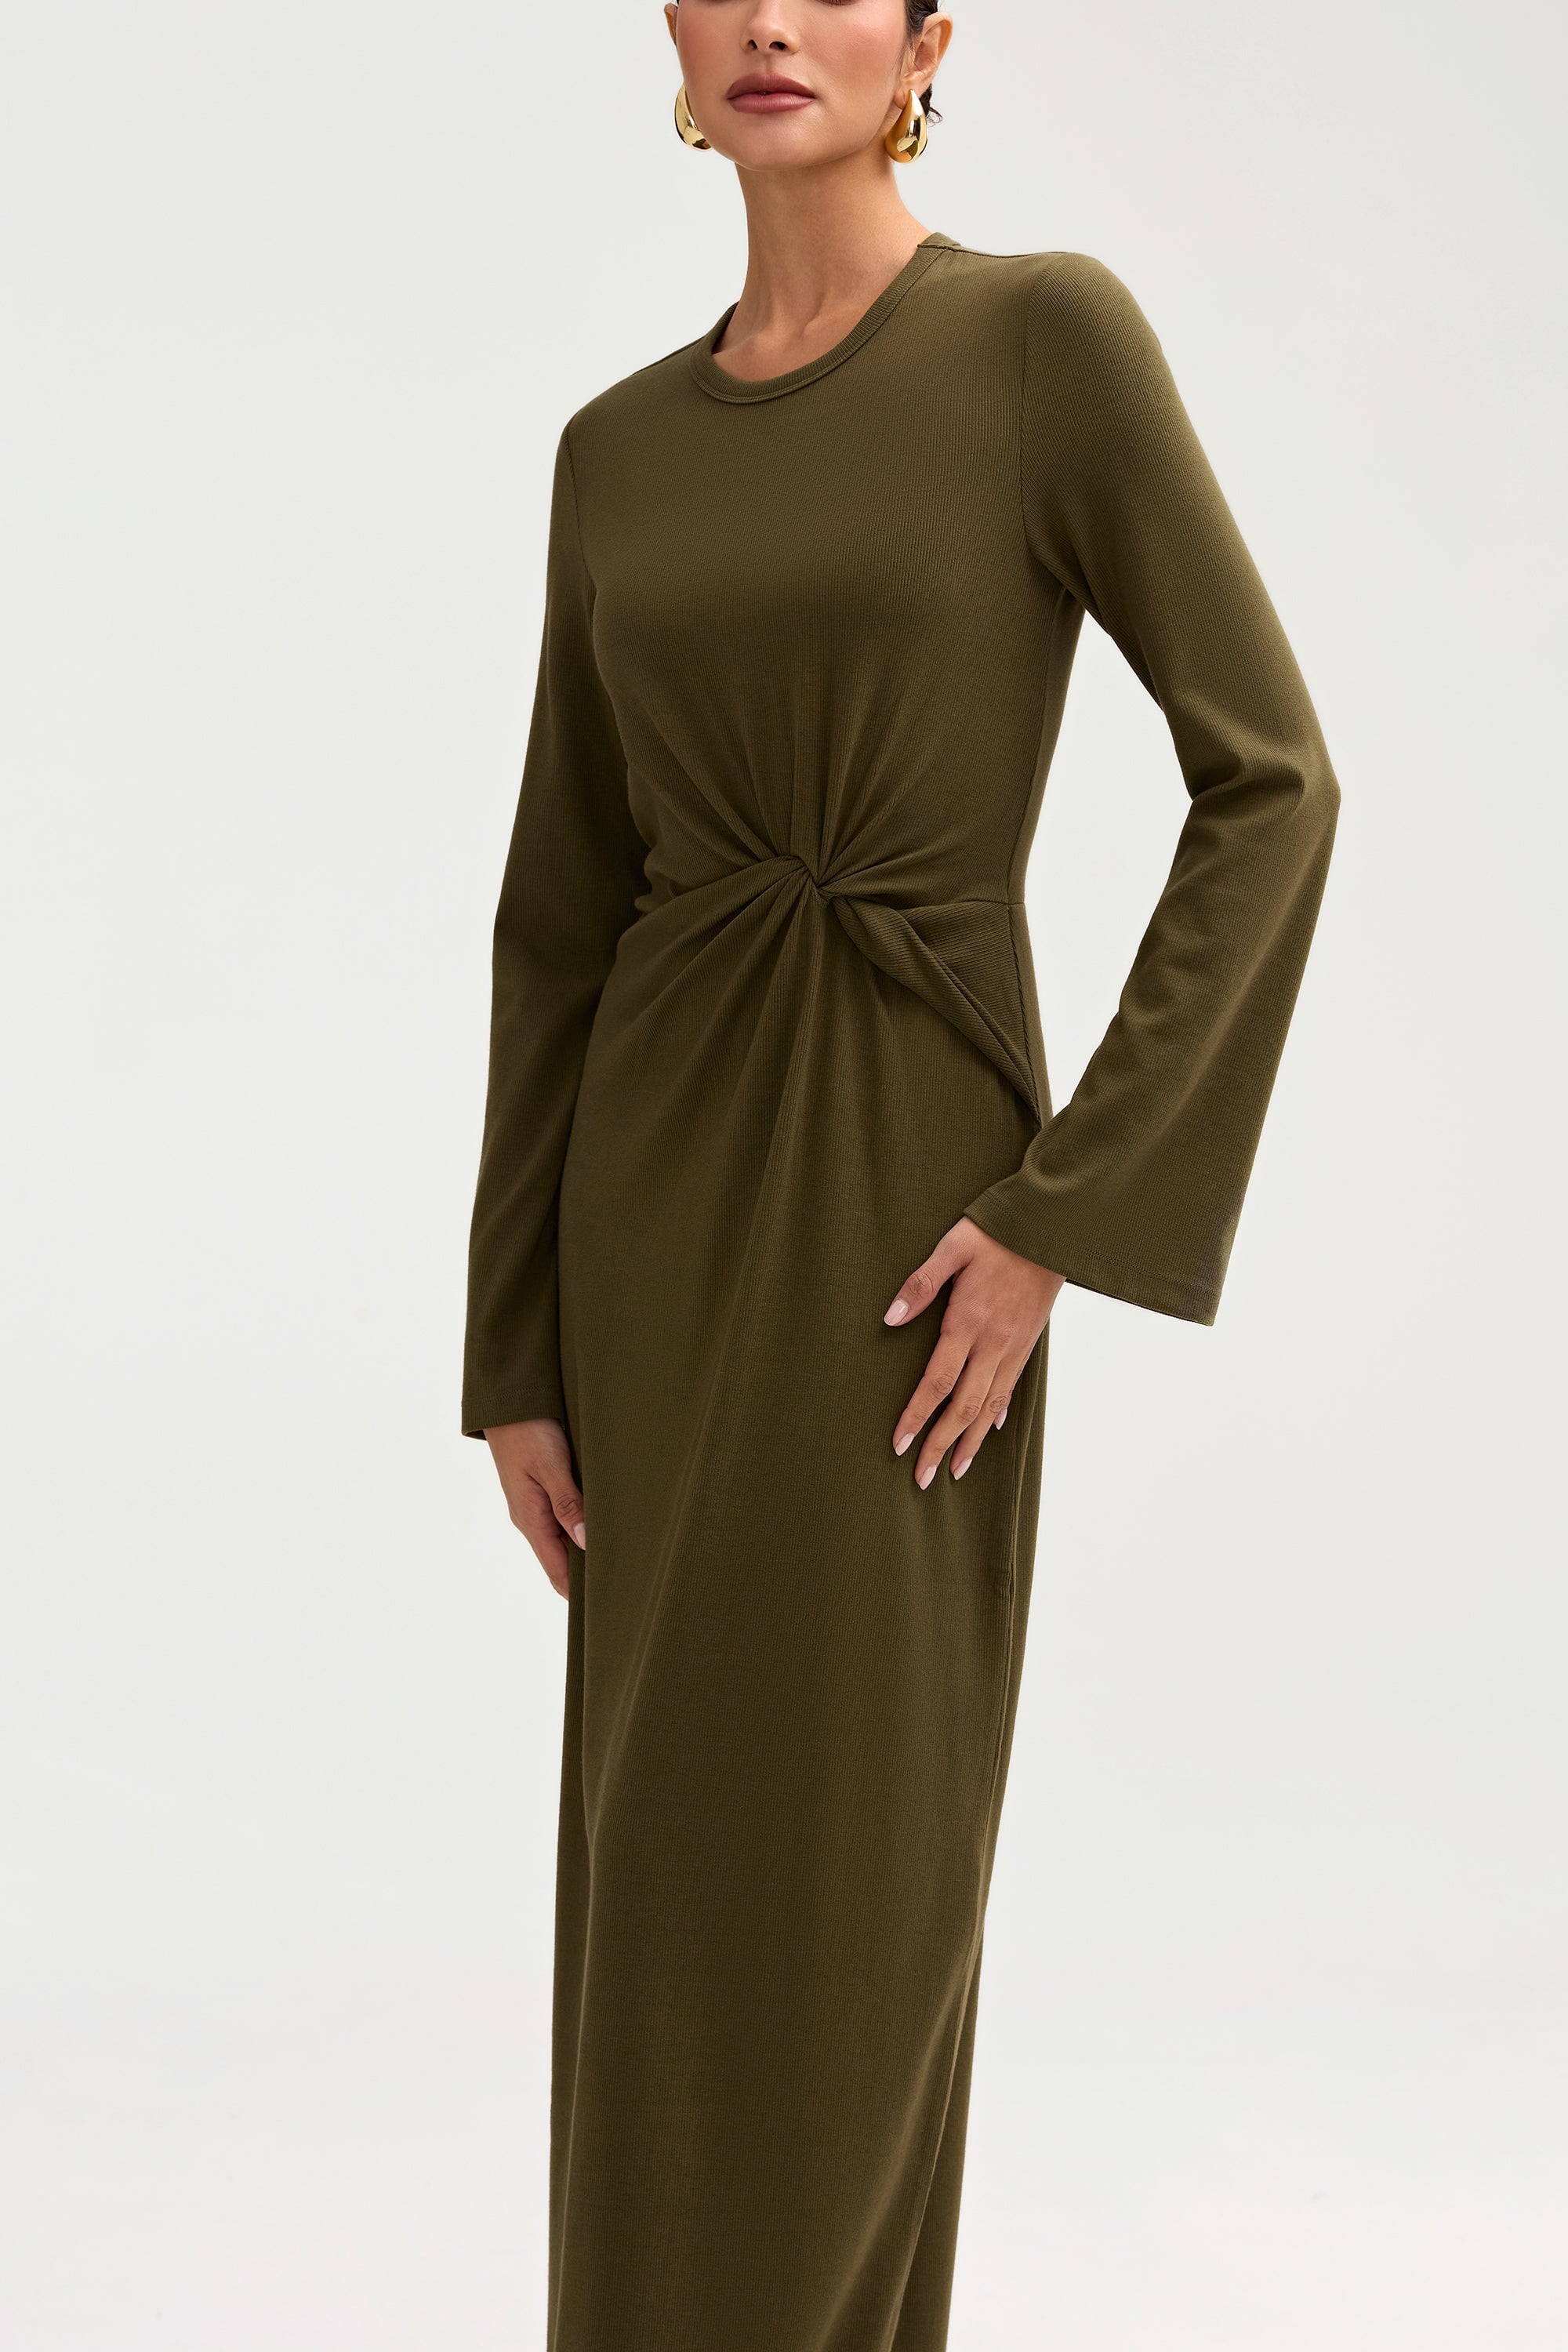 Aissia Ribbed Twist Front Maxi Dress - Olive Night Clothing Veiled 